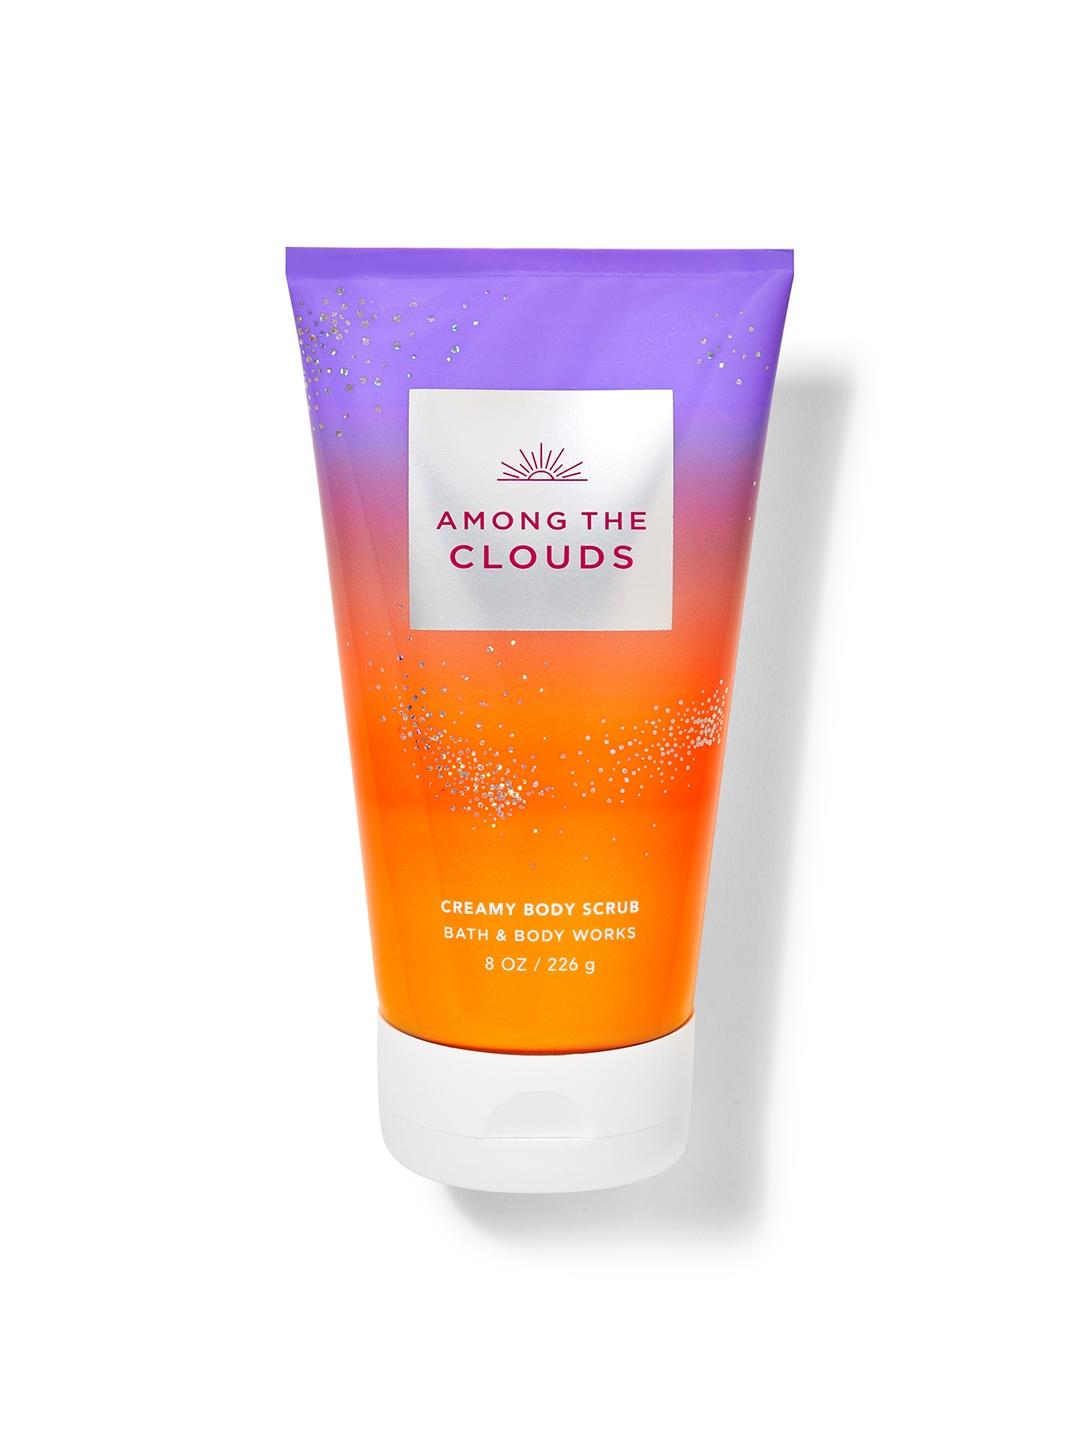 Bath & Body Works Among the Clouds Creamy Body Scrub with Shea Butter - 226g